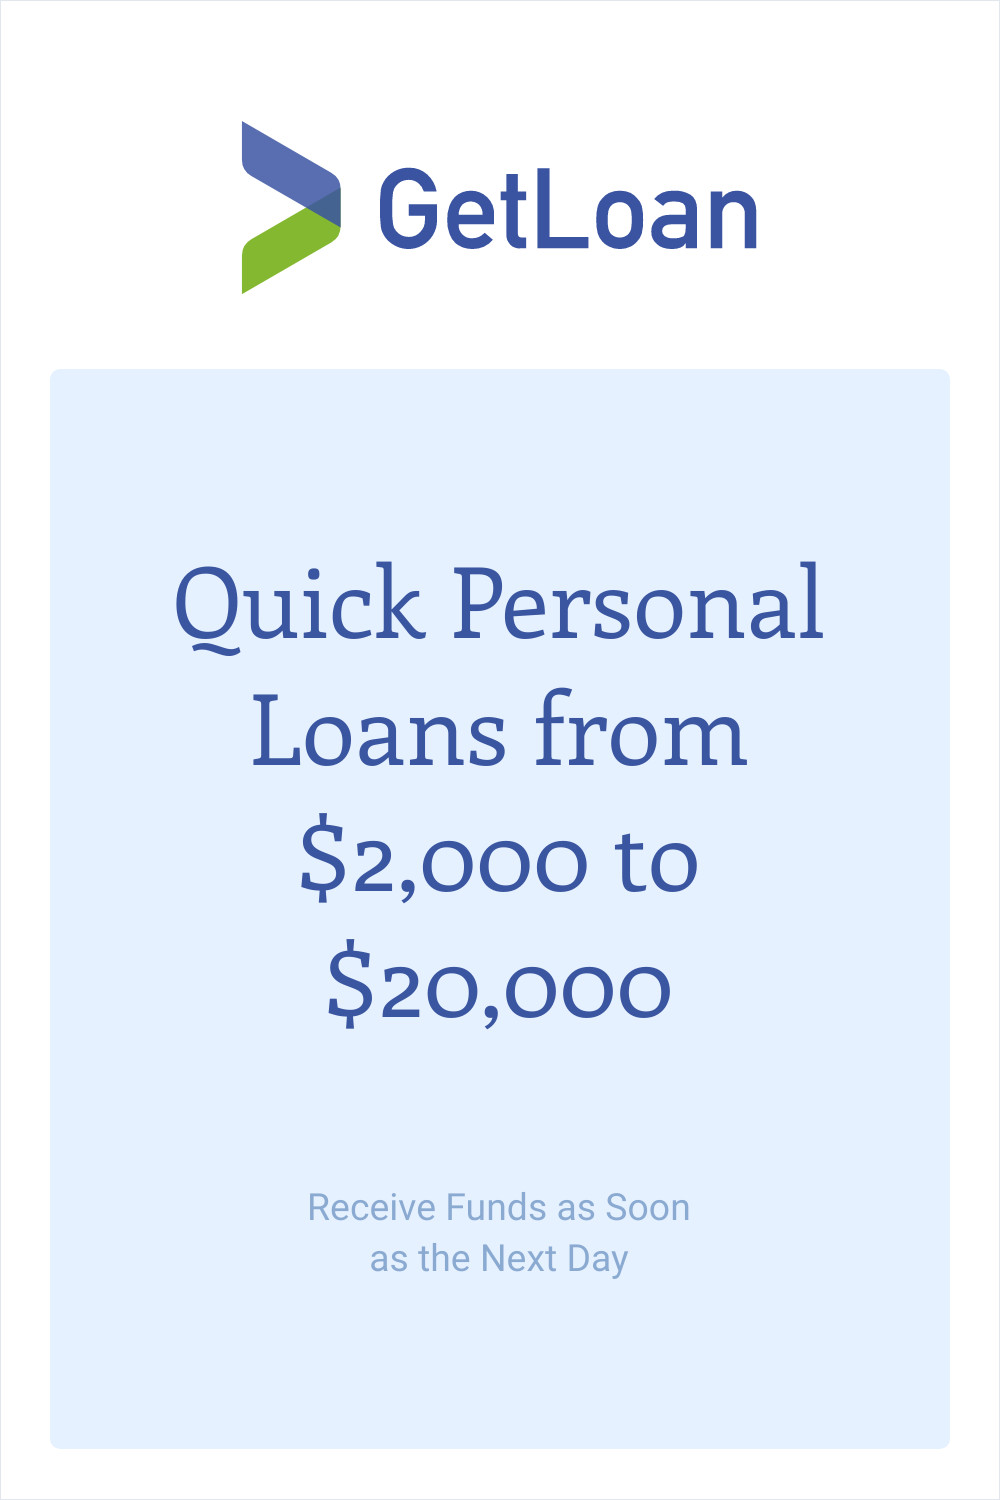 Get Quick Personal Loans